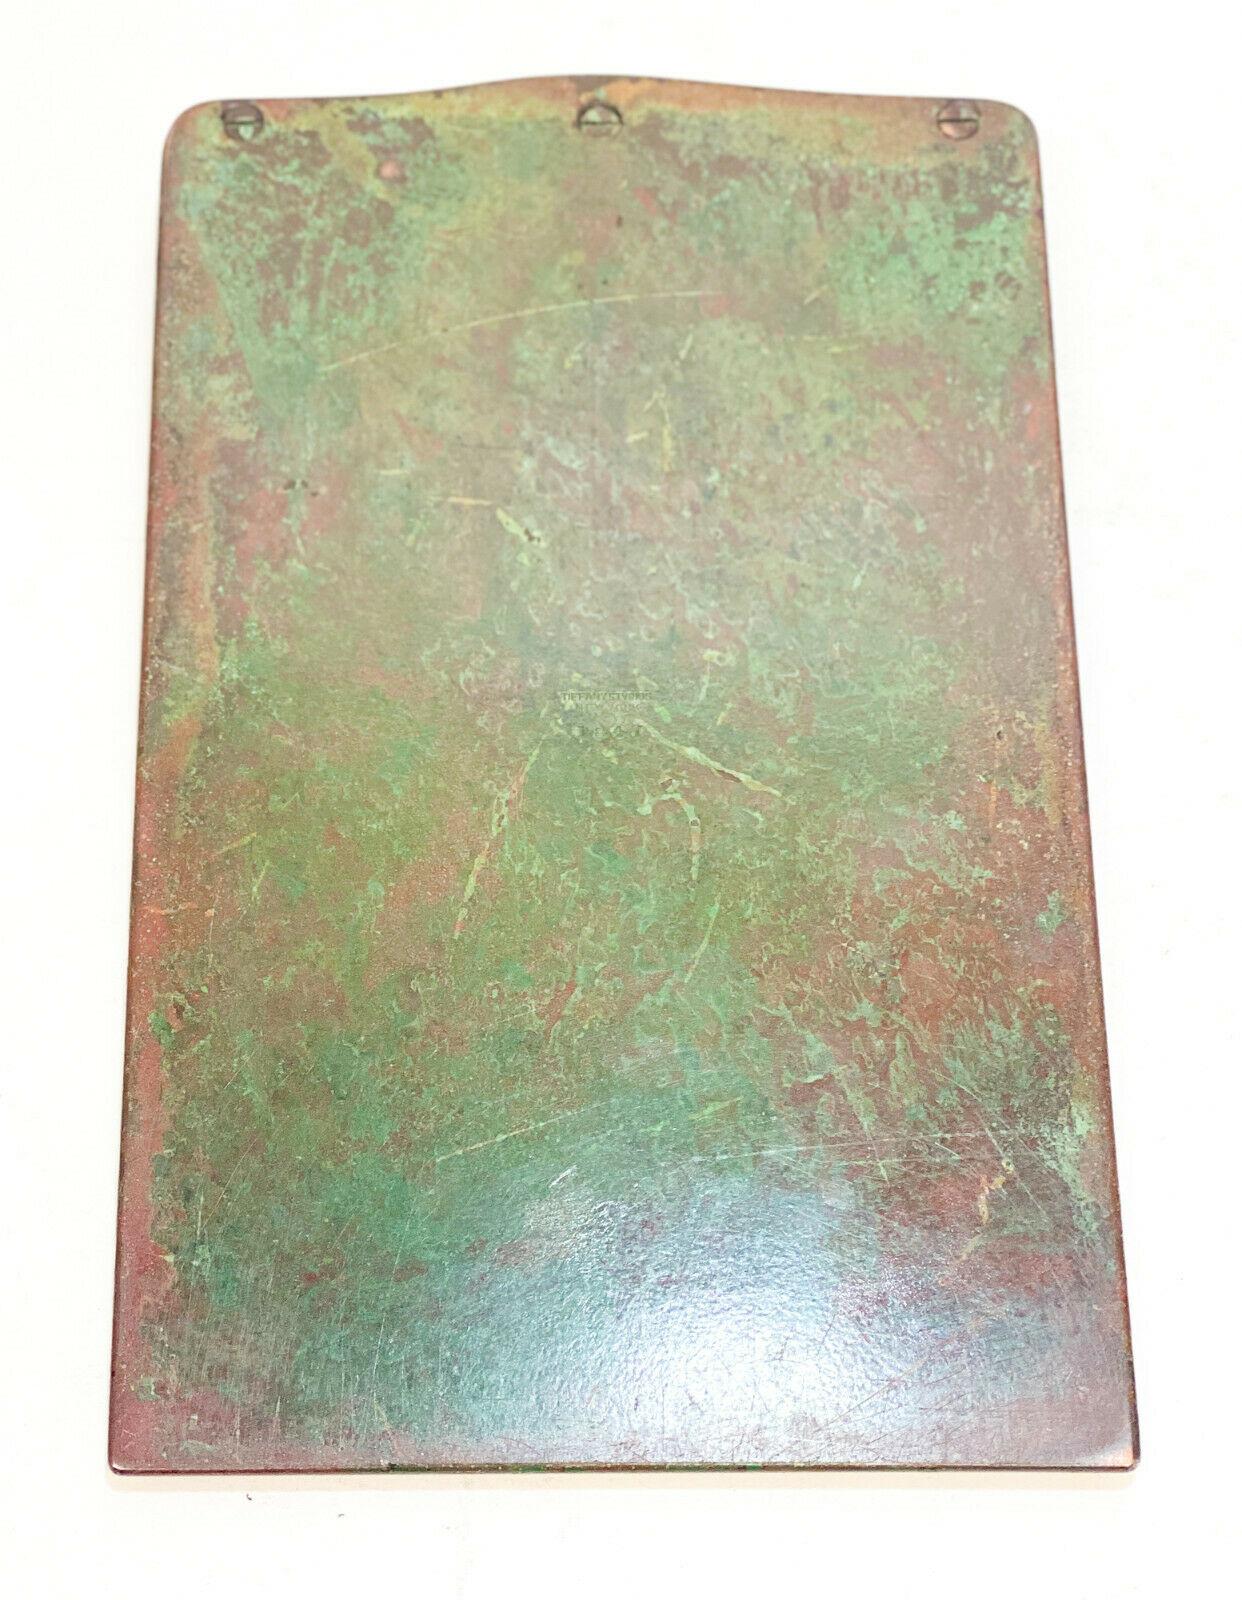 Tiffany & Co. Studios New York Bronze Note Pad in Nautical In Good Condition For Sale In Pasadena, CA